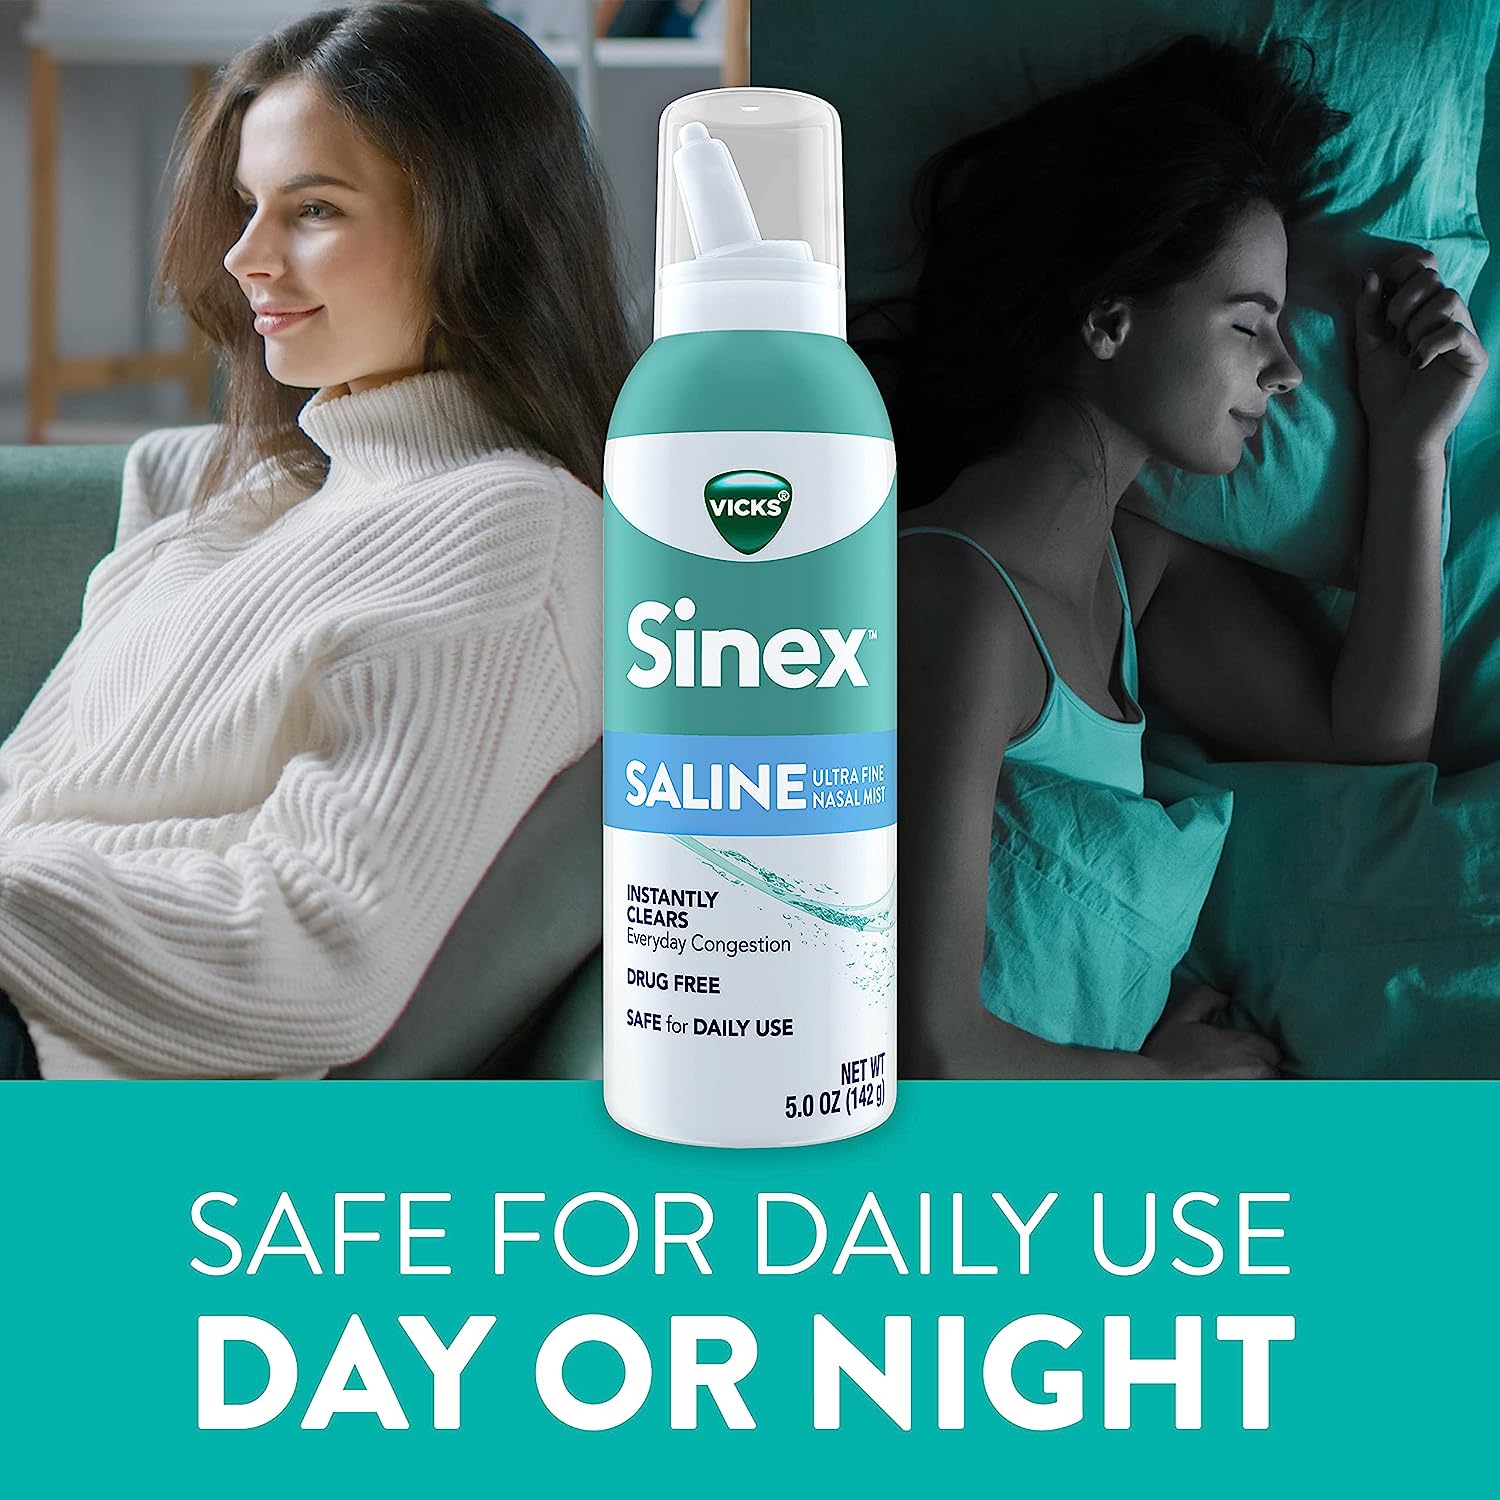 Vicks Sinex SALINE Nasal Spray, Drug Free Ultra Fine Mist, Clear Everyday Sinus Congestion Fast, Clear Mucus from a Cold or Allergy, Daily Use 5.0 fl oz x 2 : Health & Household